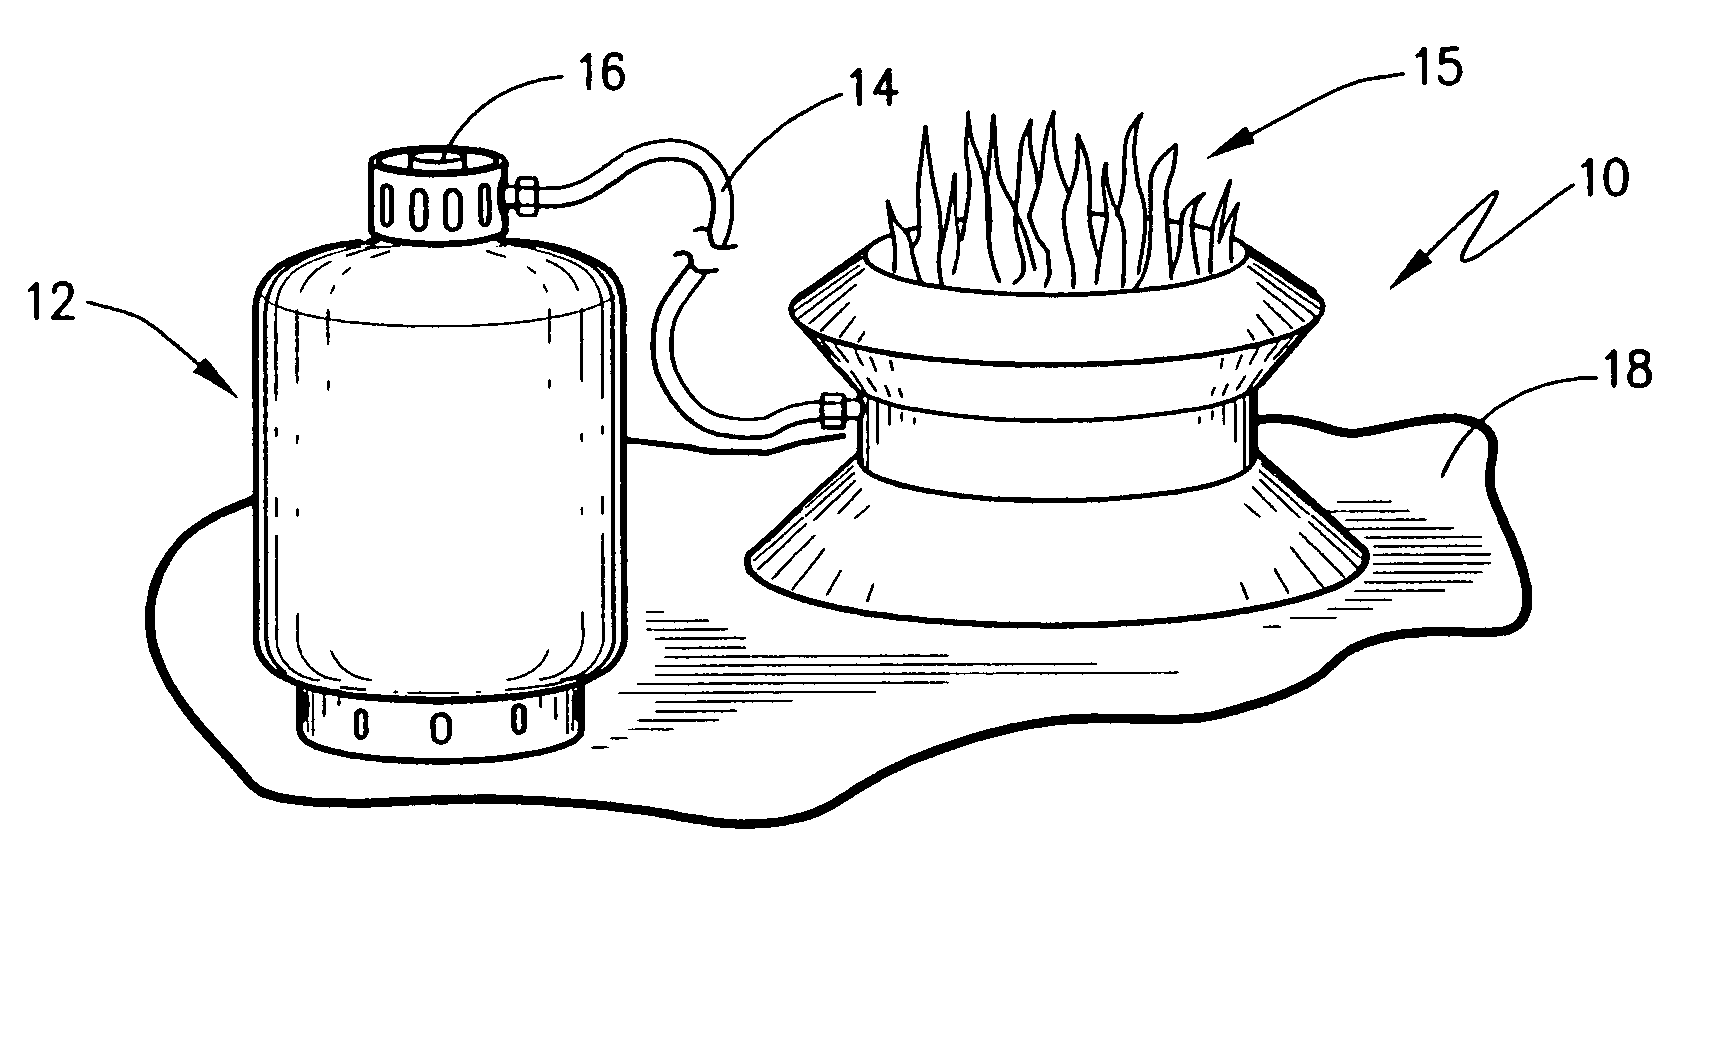 Apparatus and method for simulated campfire